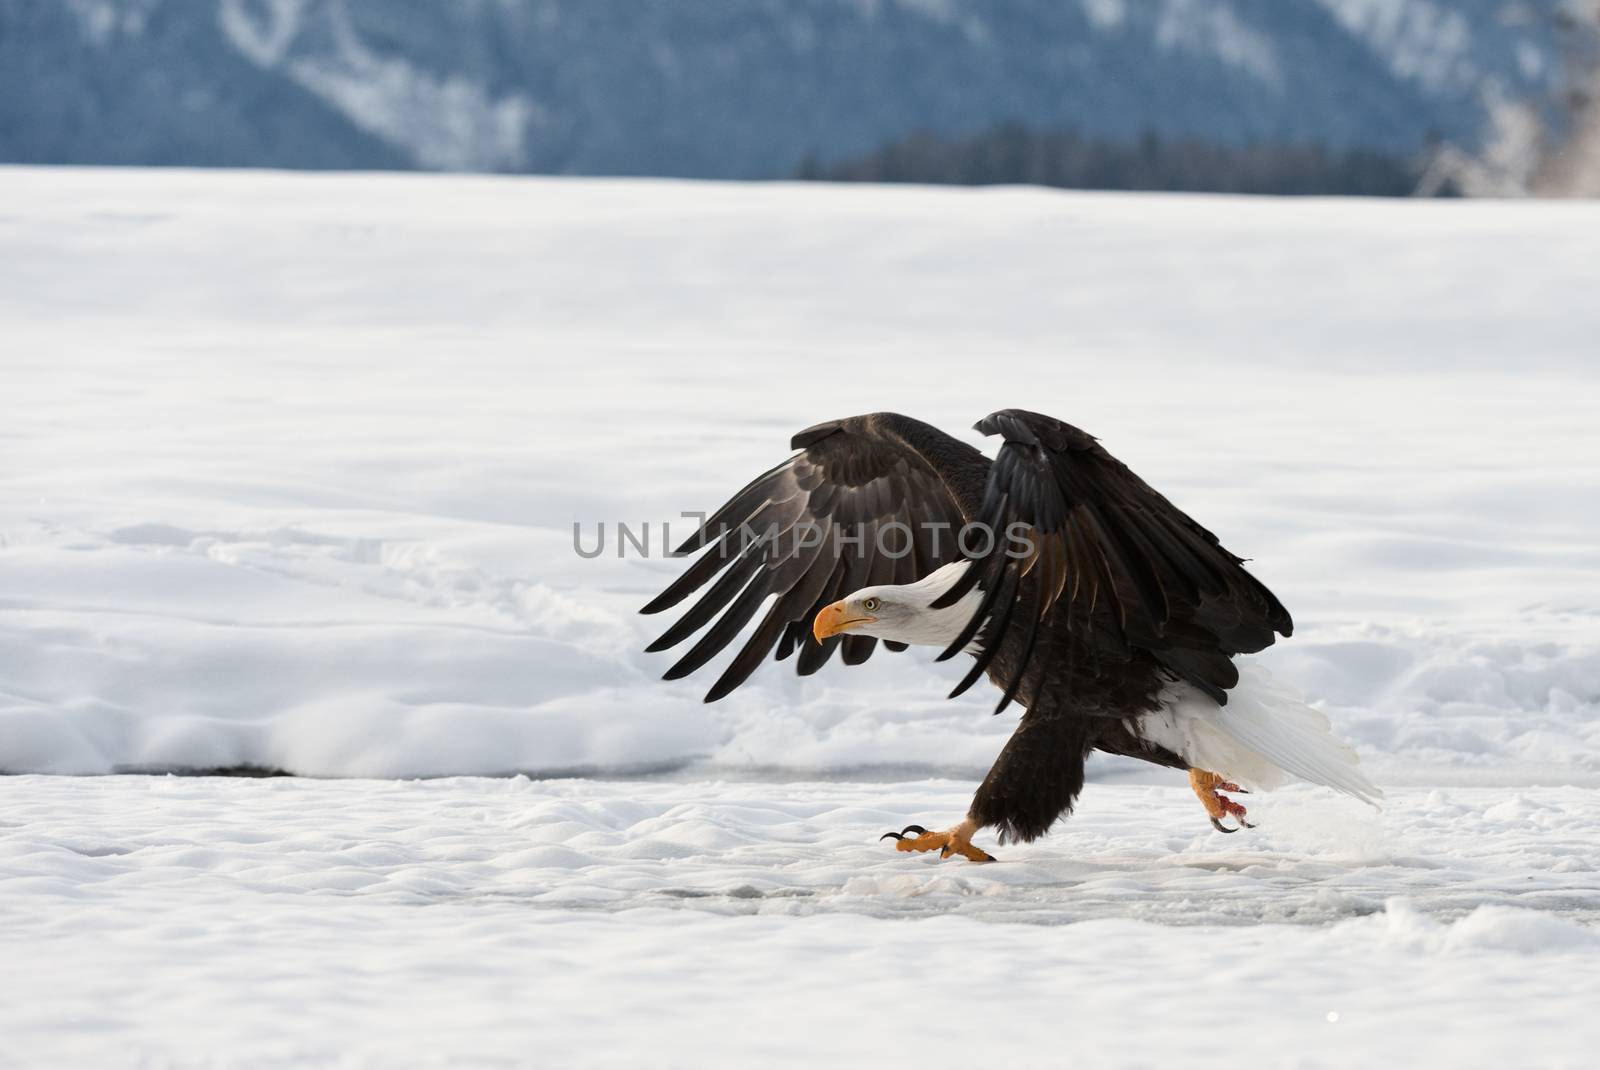 The Bald eagle landed by SURZ